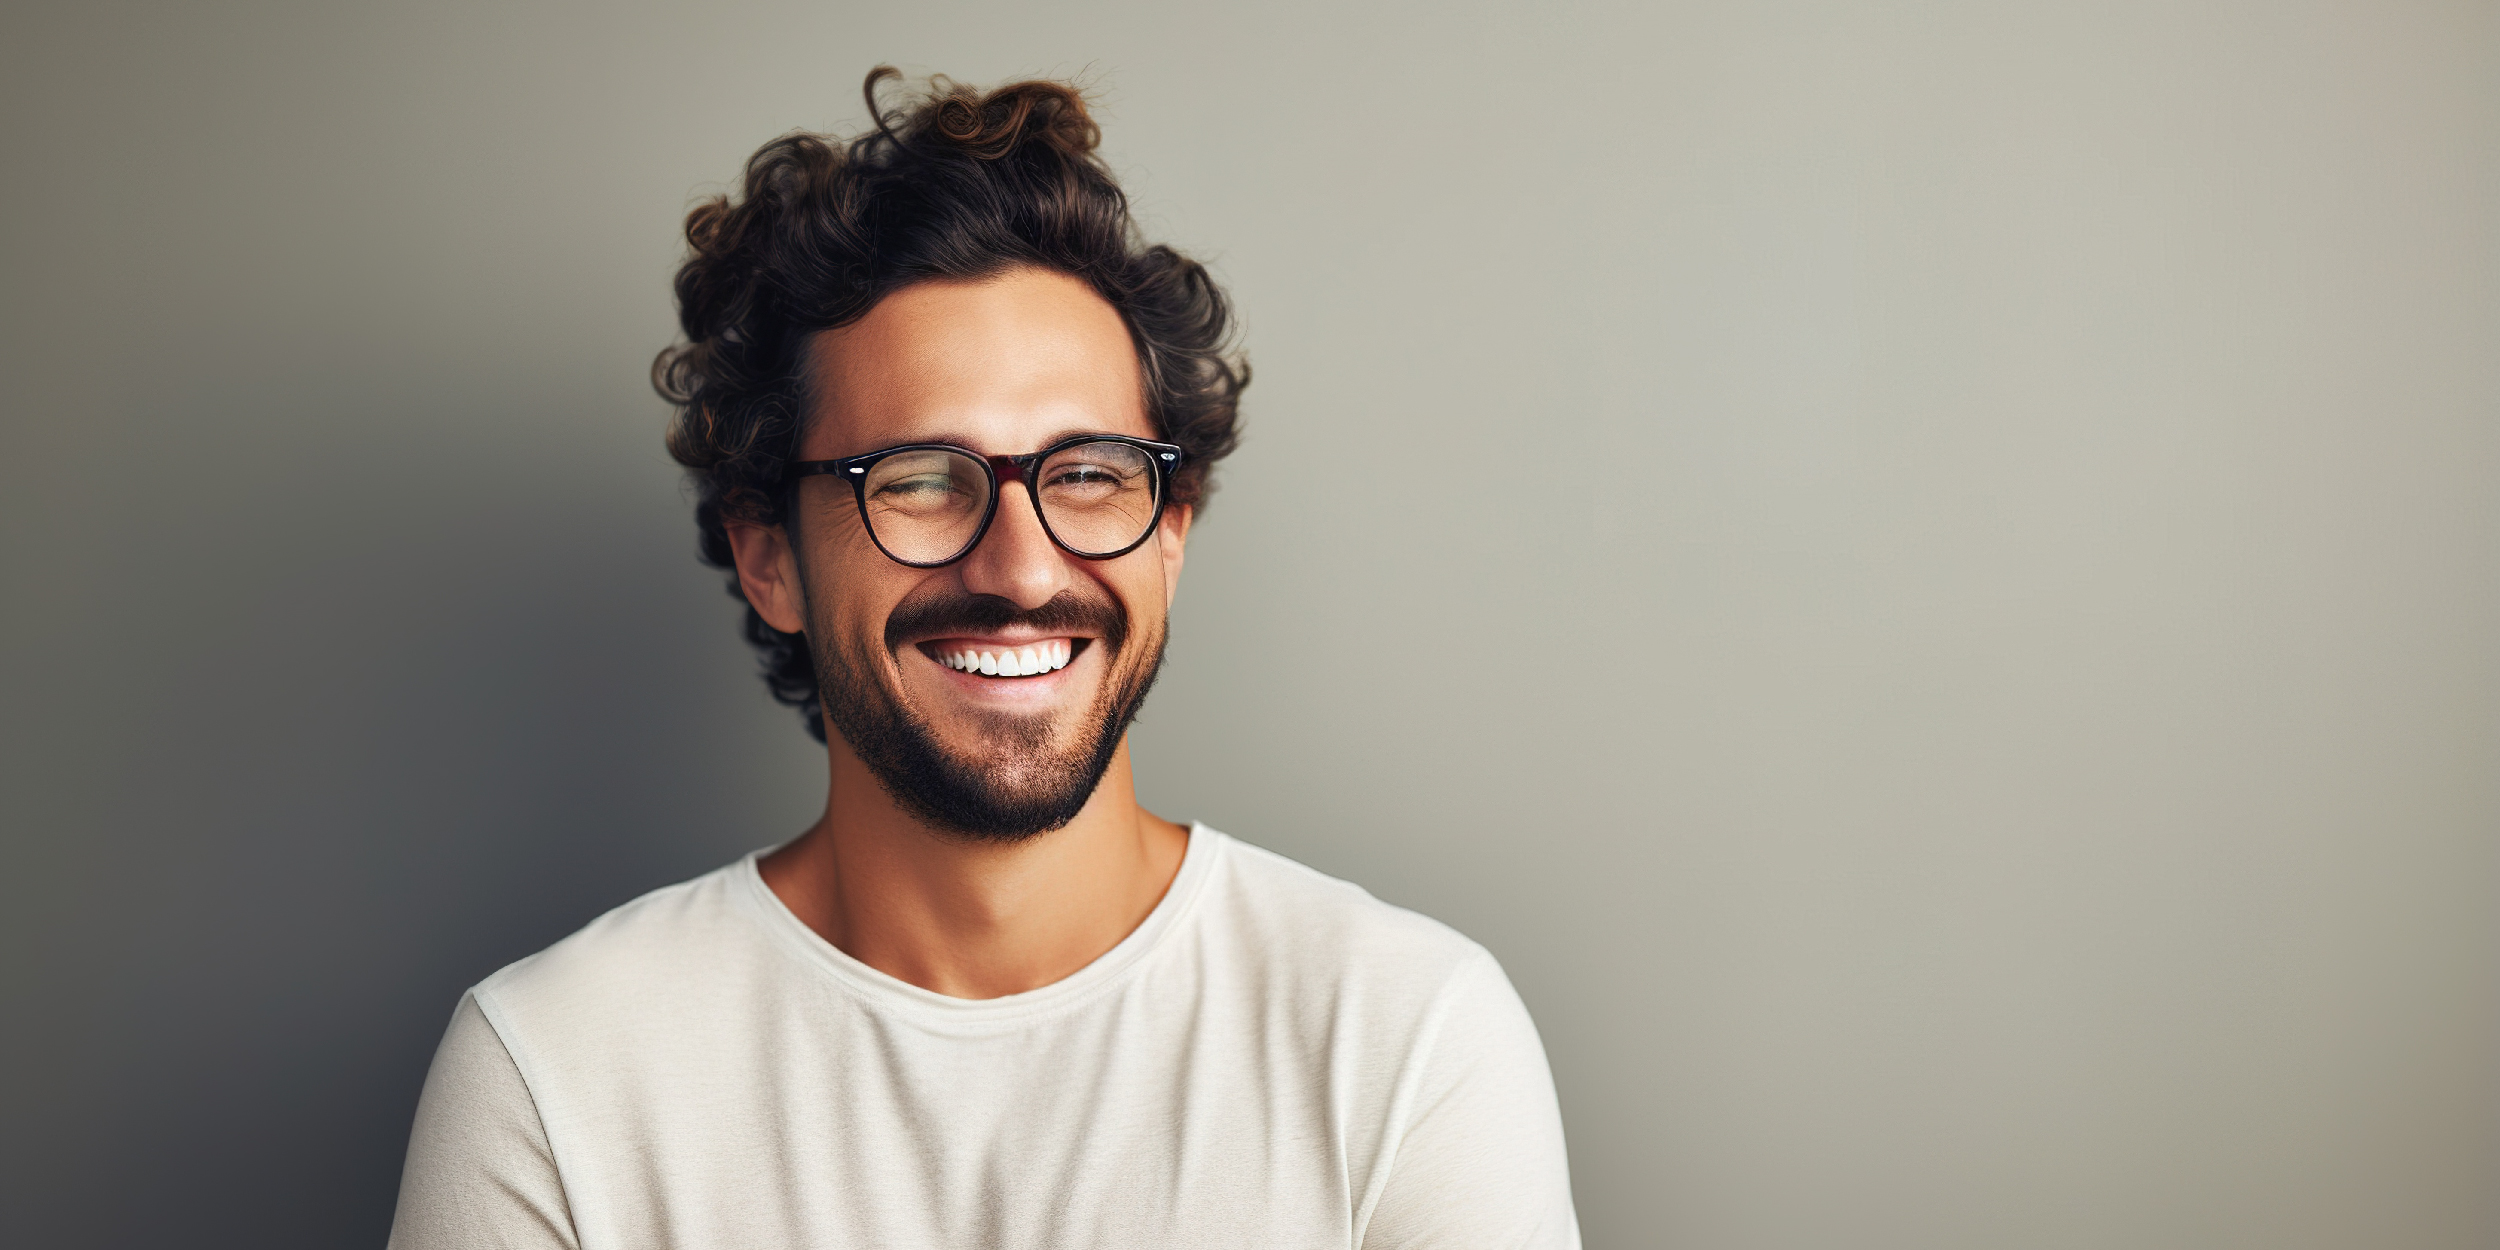 brown curly haired man with glasses smiling 